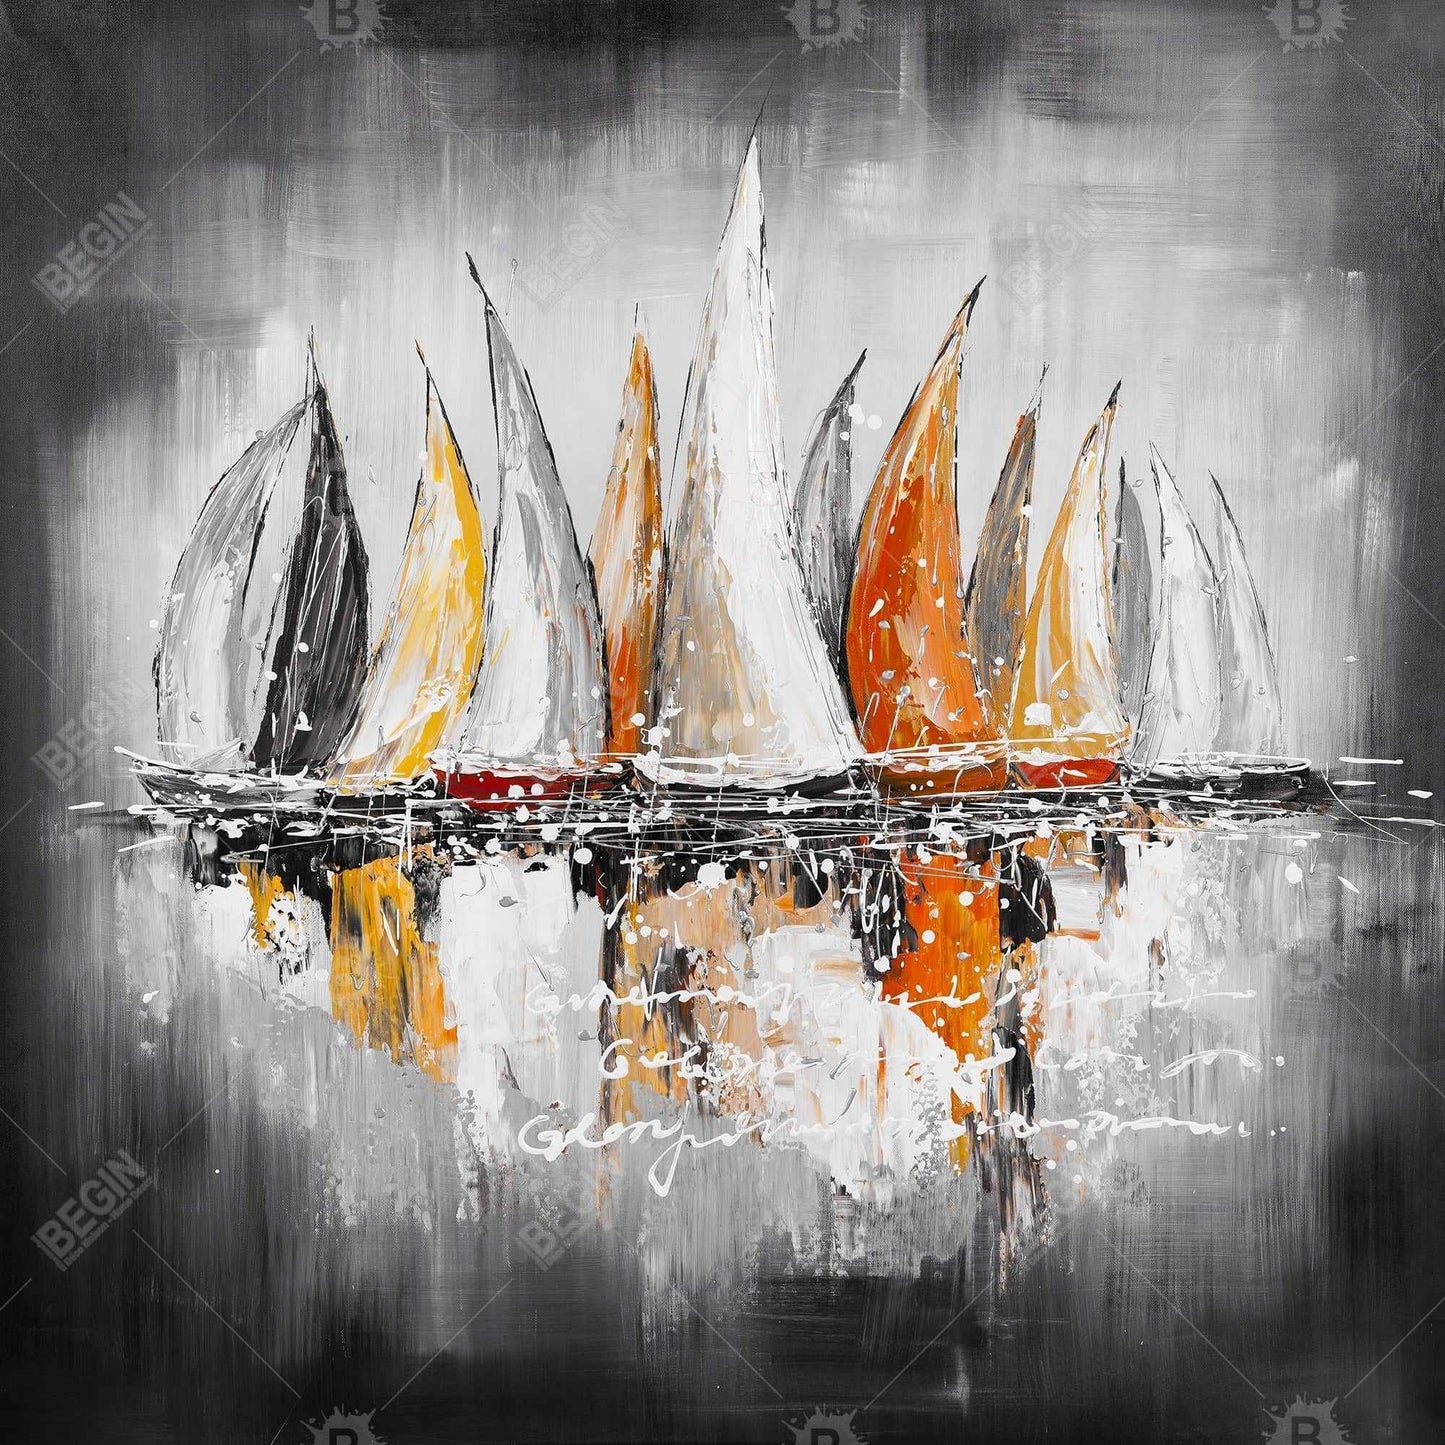 Sails on the winds - 12x12 Print on canvas